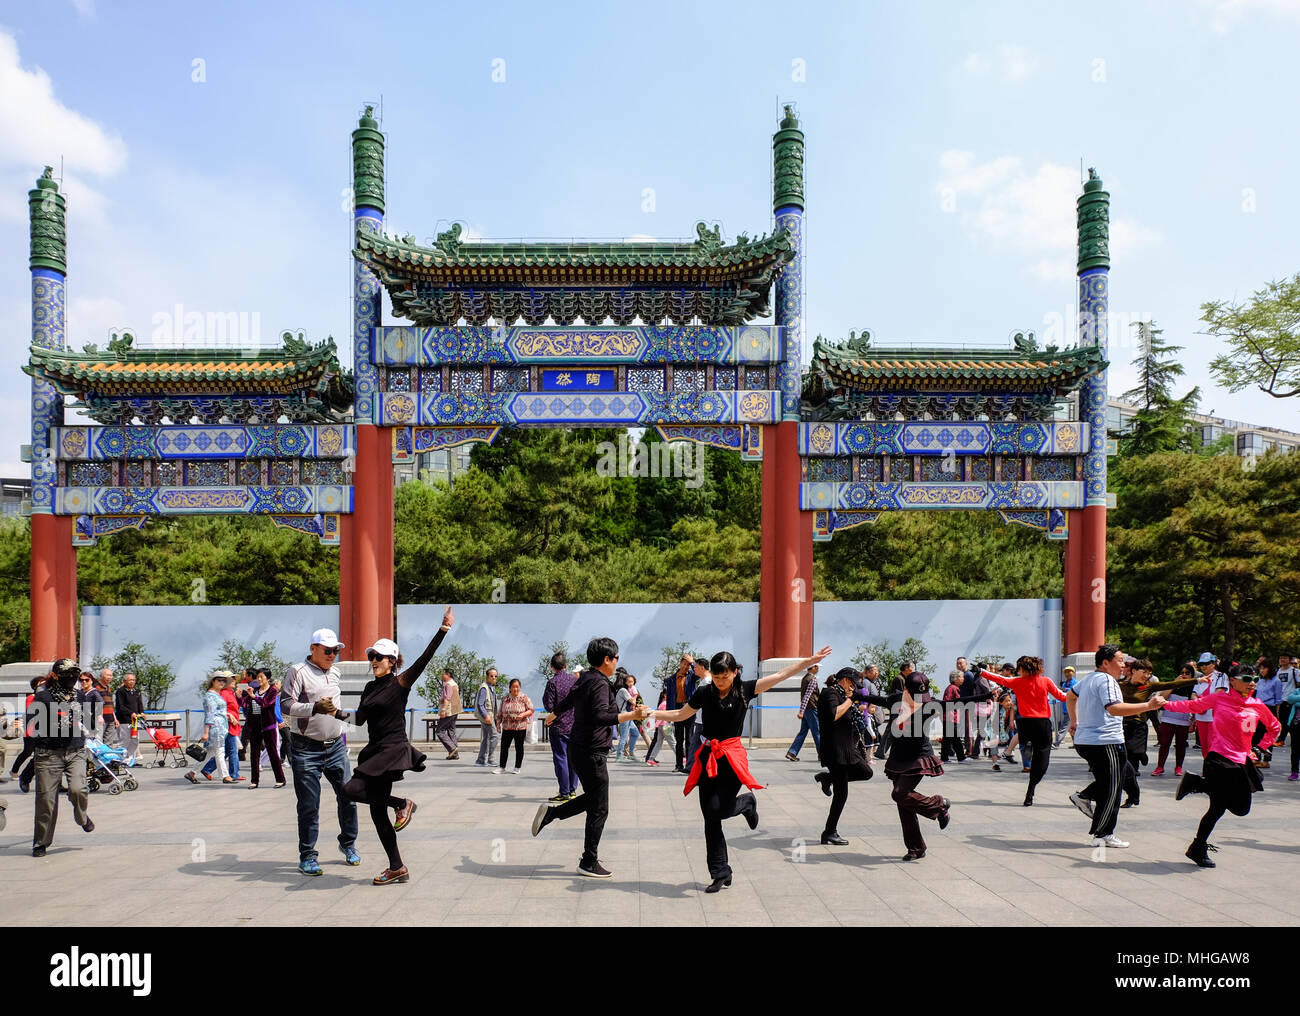 BEIJING, CHINA - APRIL 30, 2018: Dancing people in a park. Taoranting Park is a major city park located in Xicheng District in the southern part of Be Stock Photo